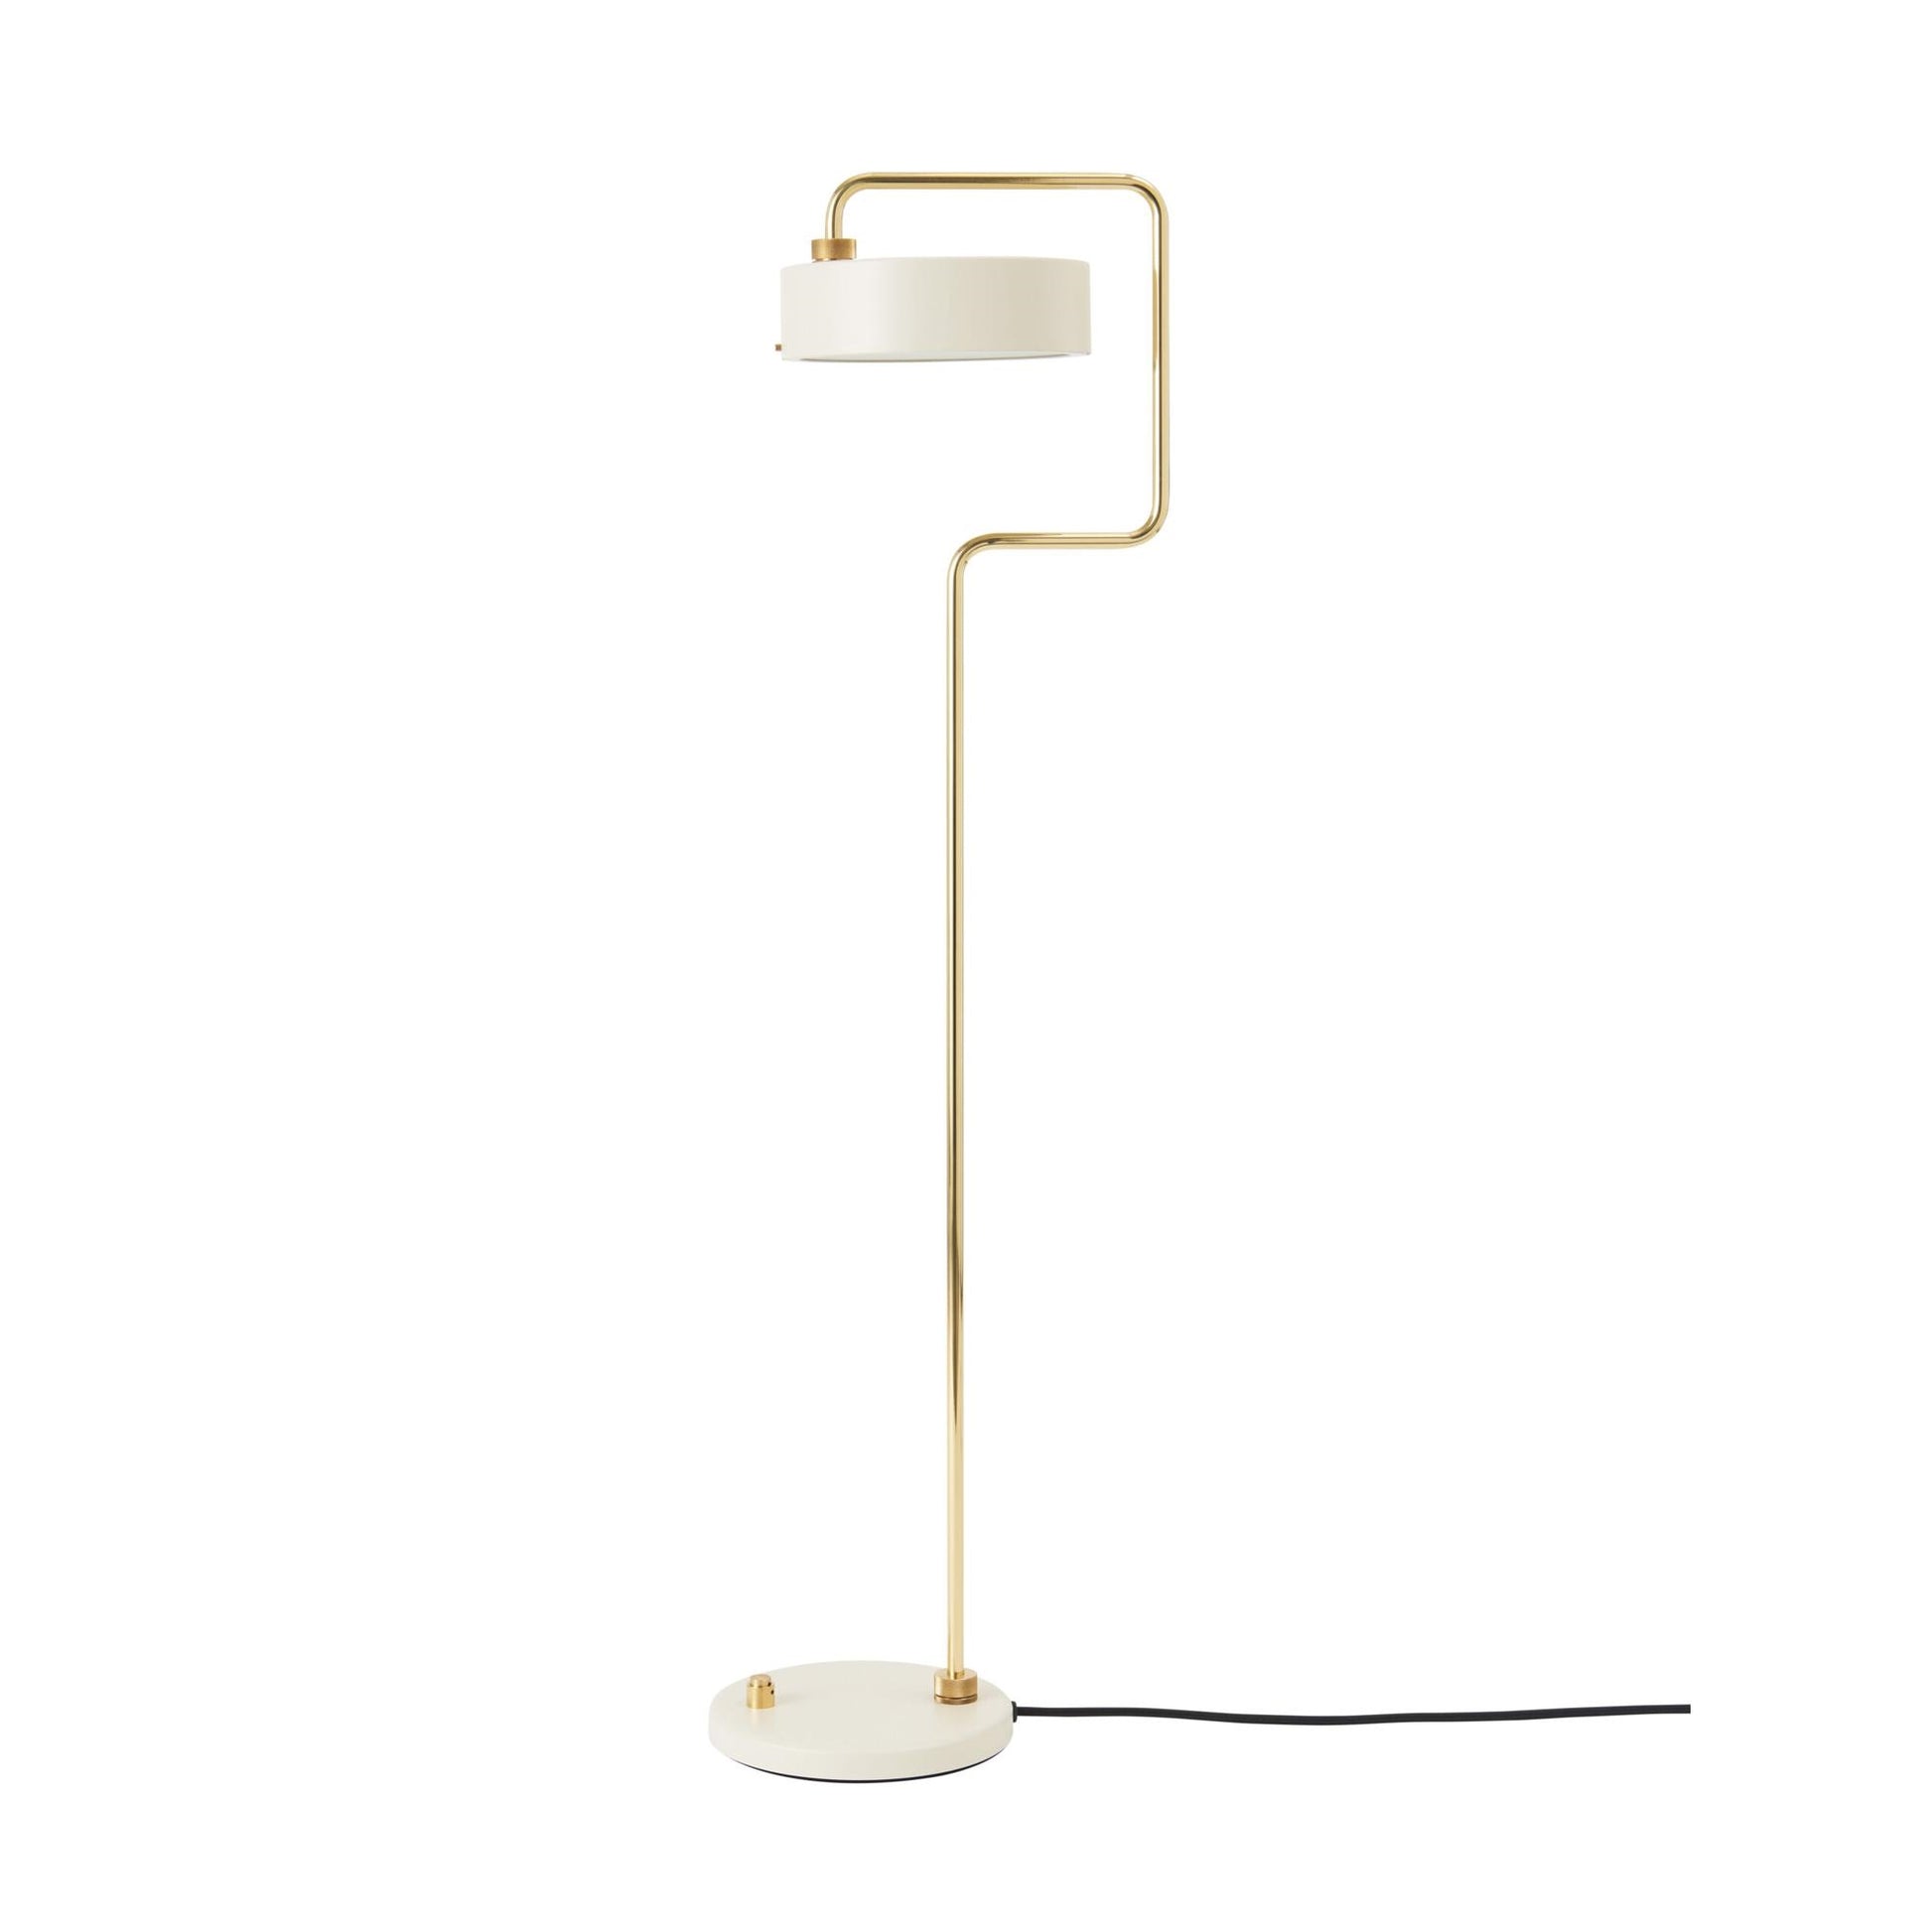 Petite Machine Floor Lamp 01 by Made By Hand #White